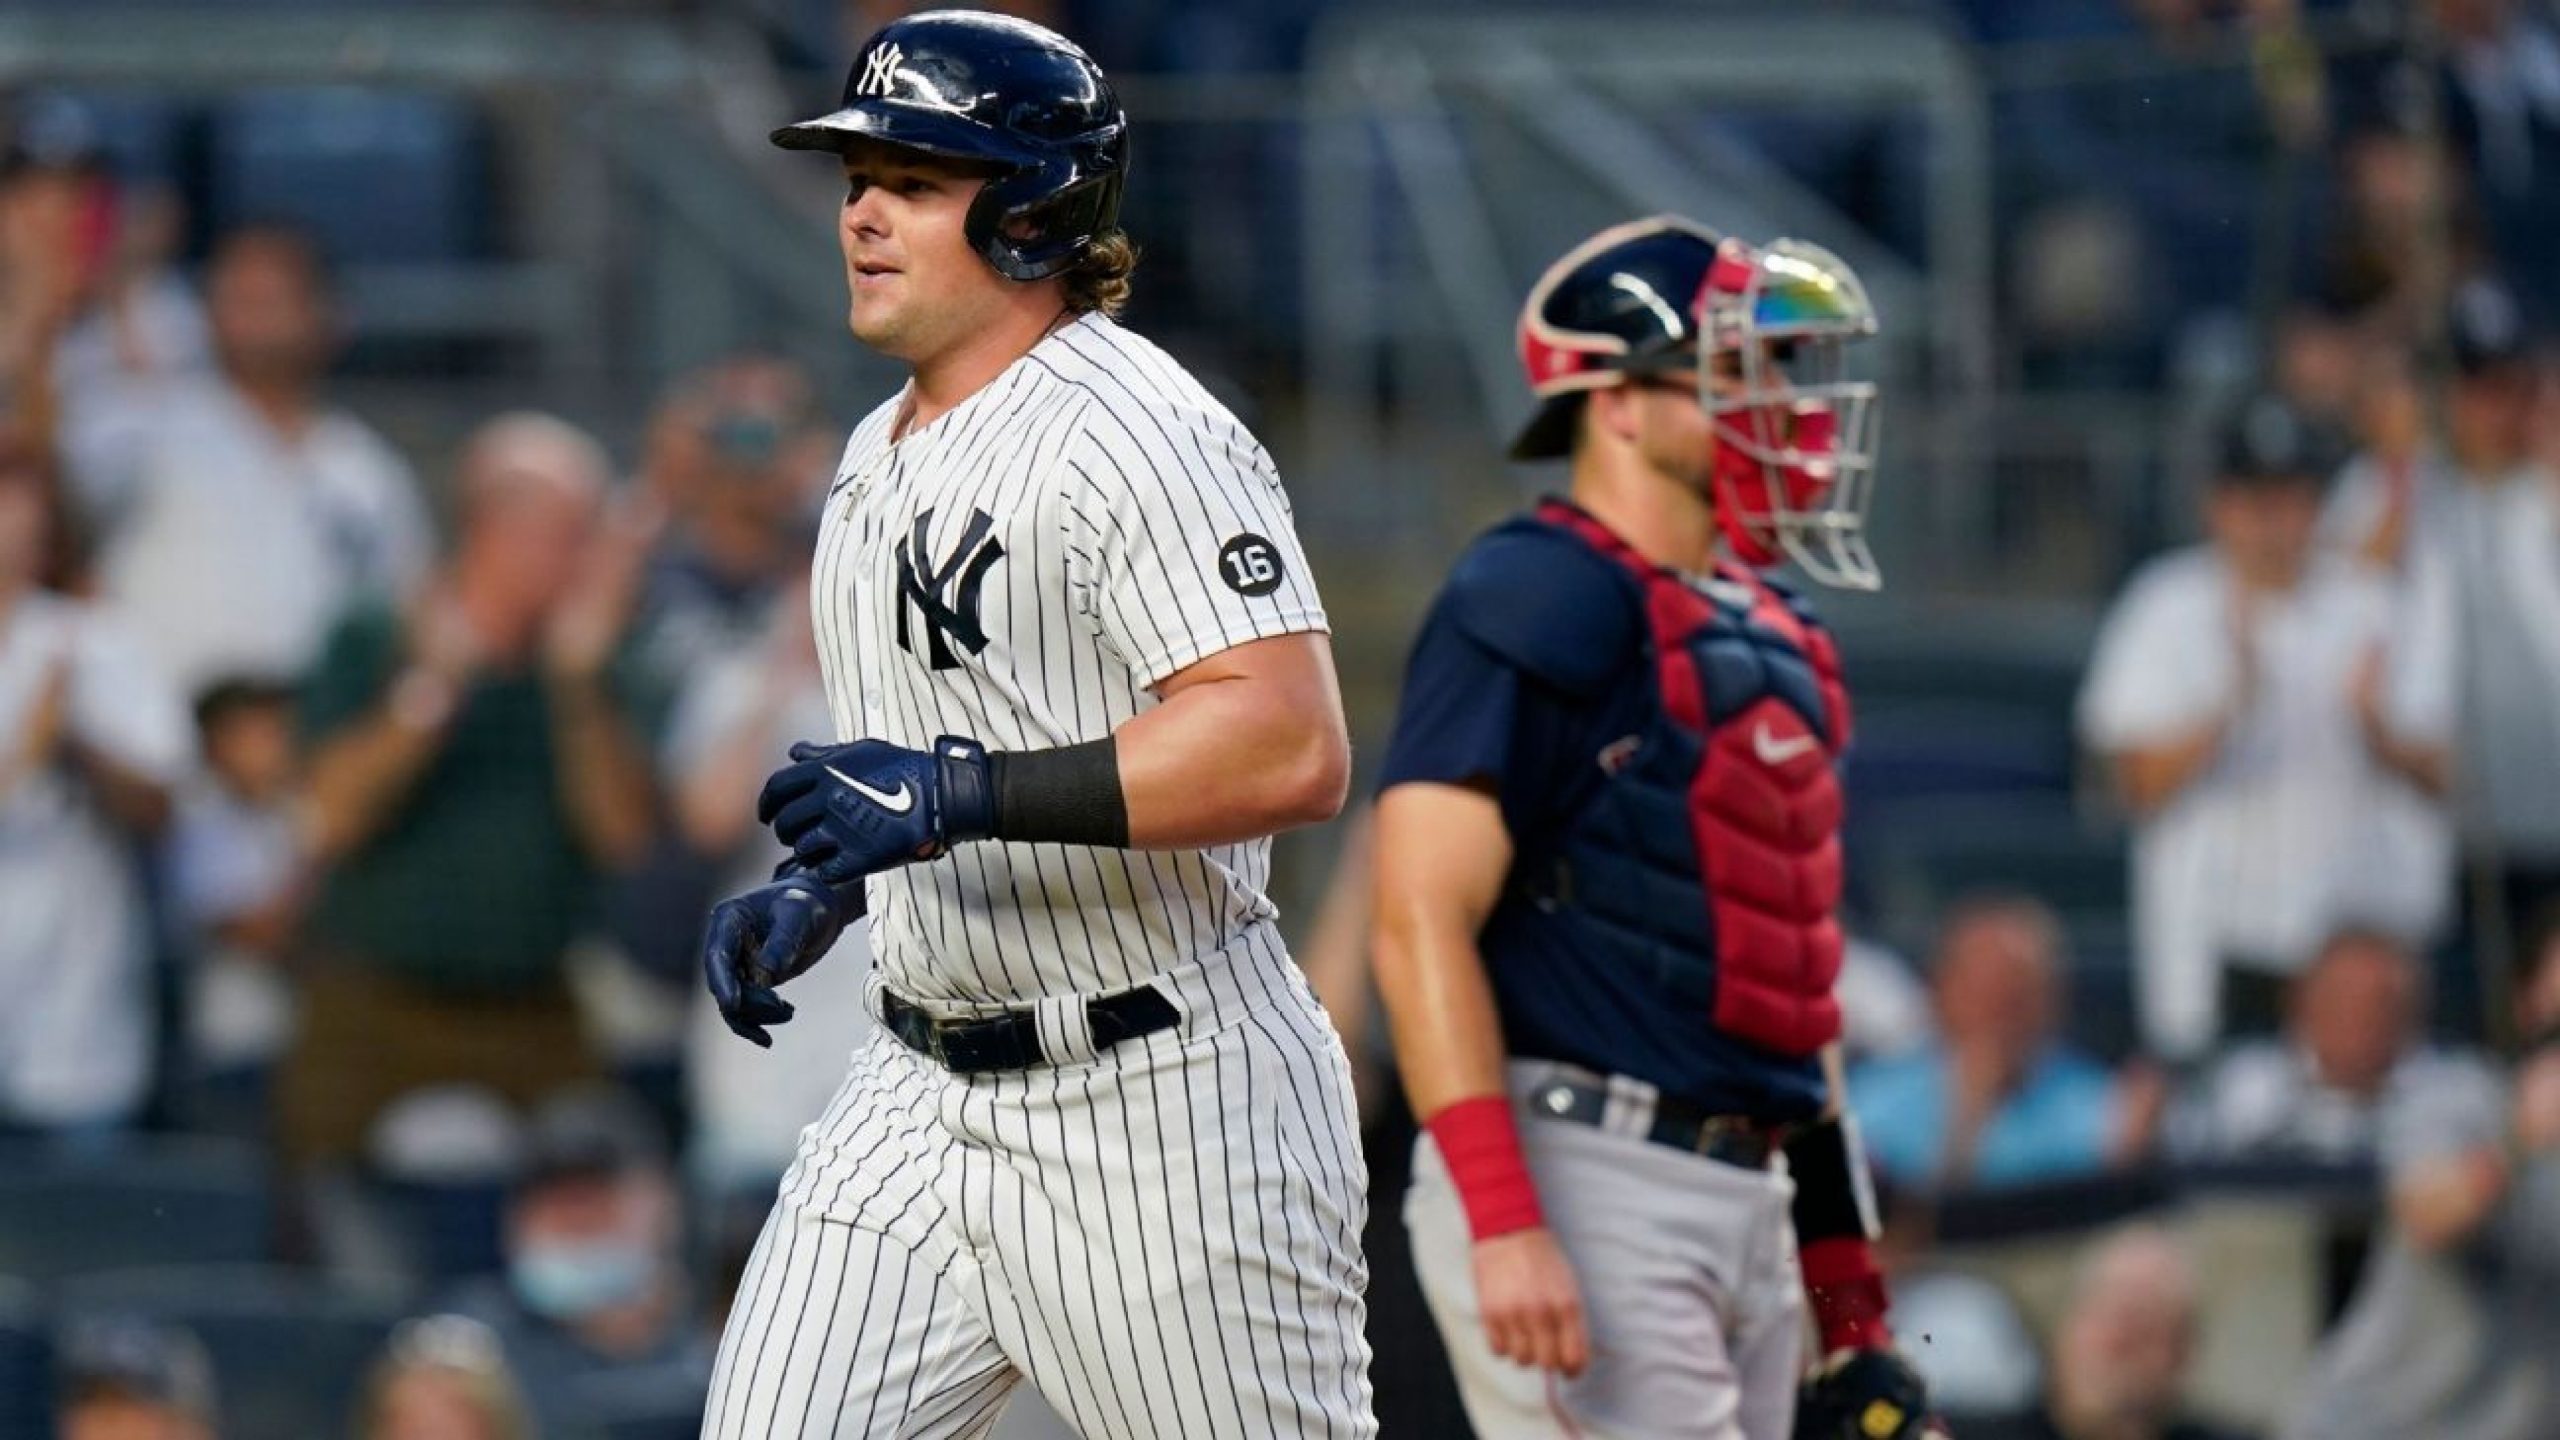 Yanks’ Voit: ‘I deserve to play’ as much as Rizzo